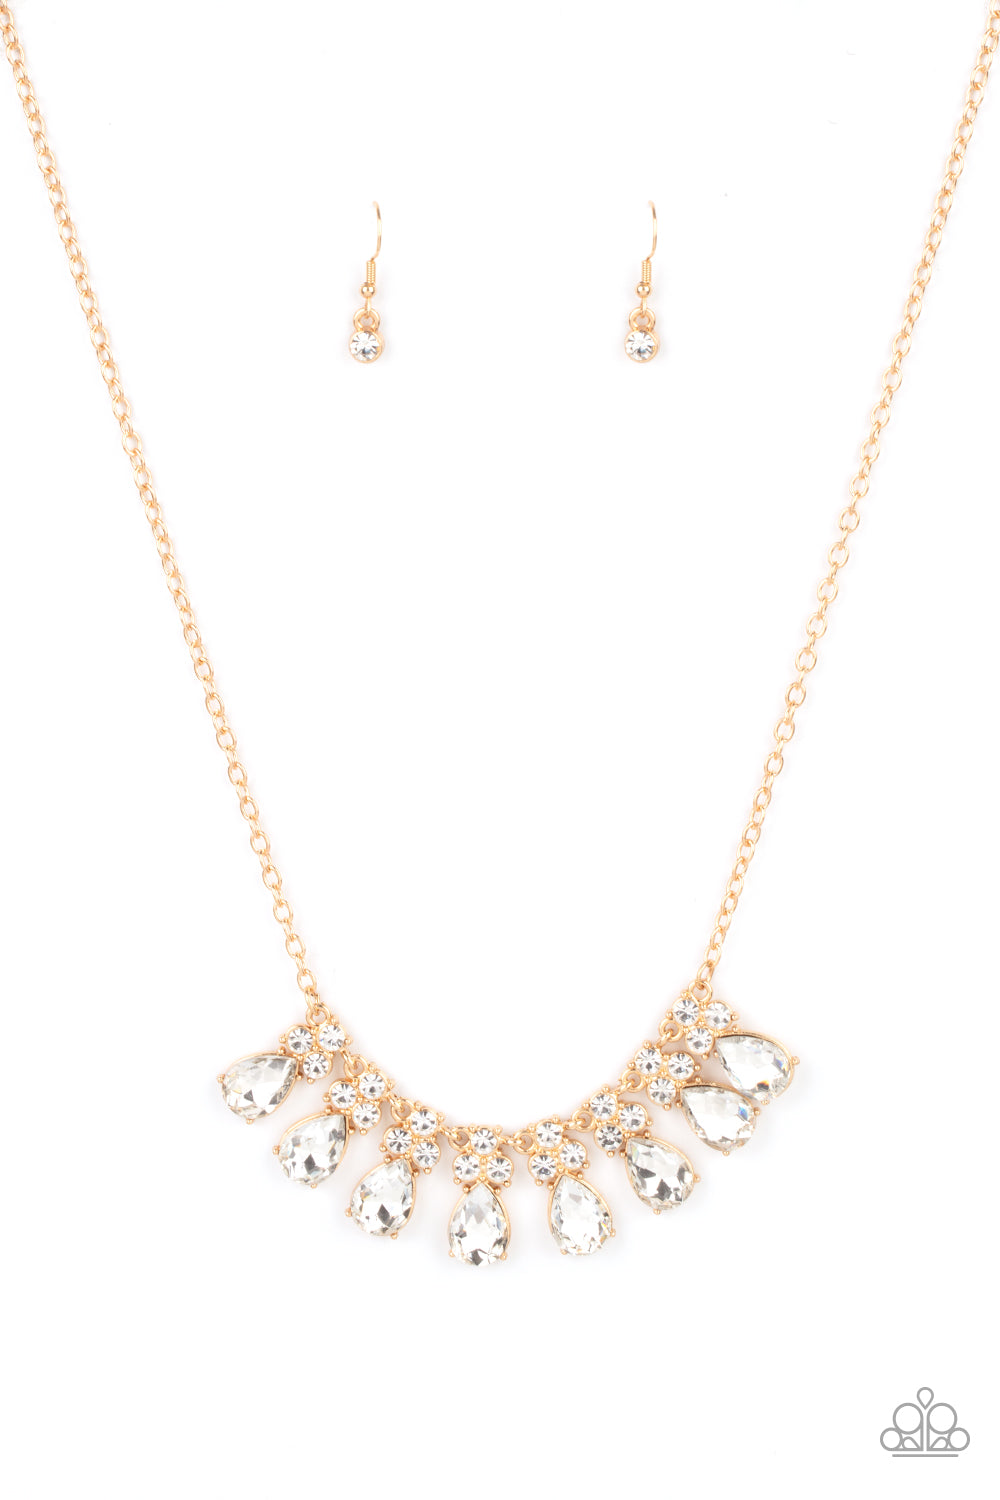 A242 - Sparkly Ever After, Paparazzi Gold Necklace by Paparazzi Accessories on Fancy5Fashion.com